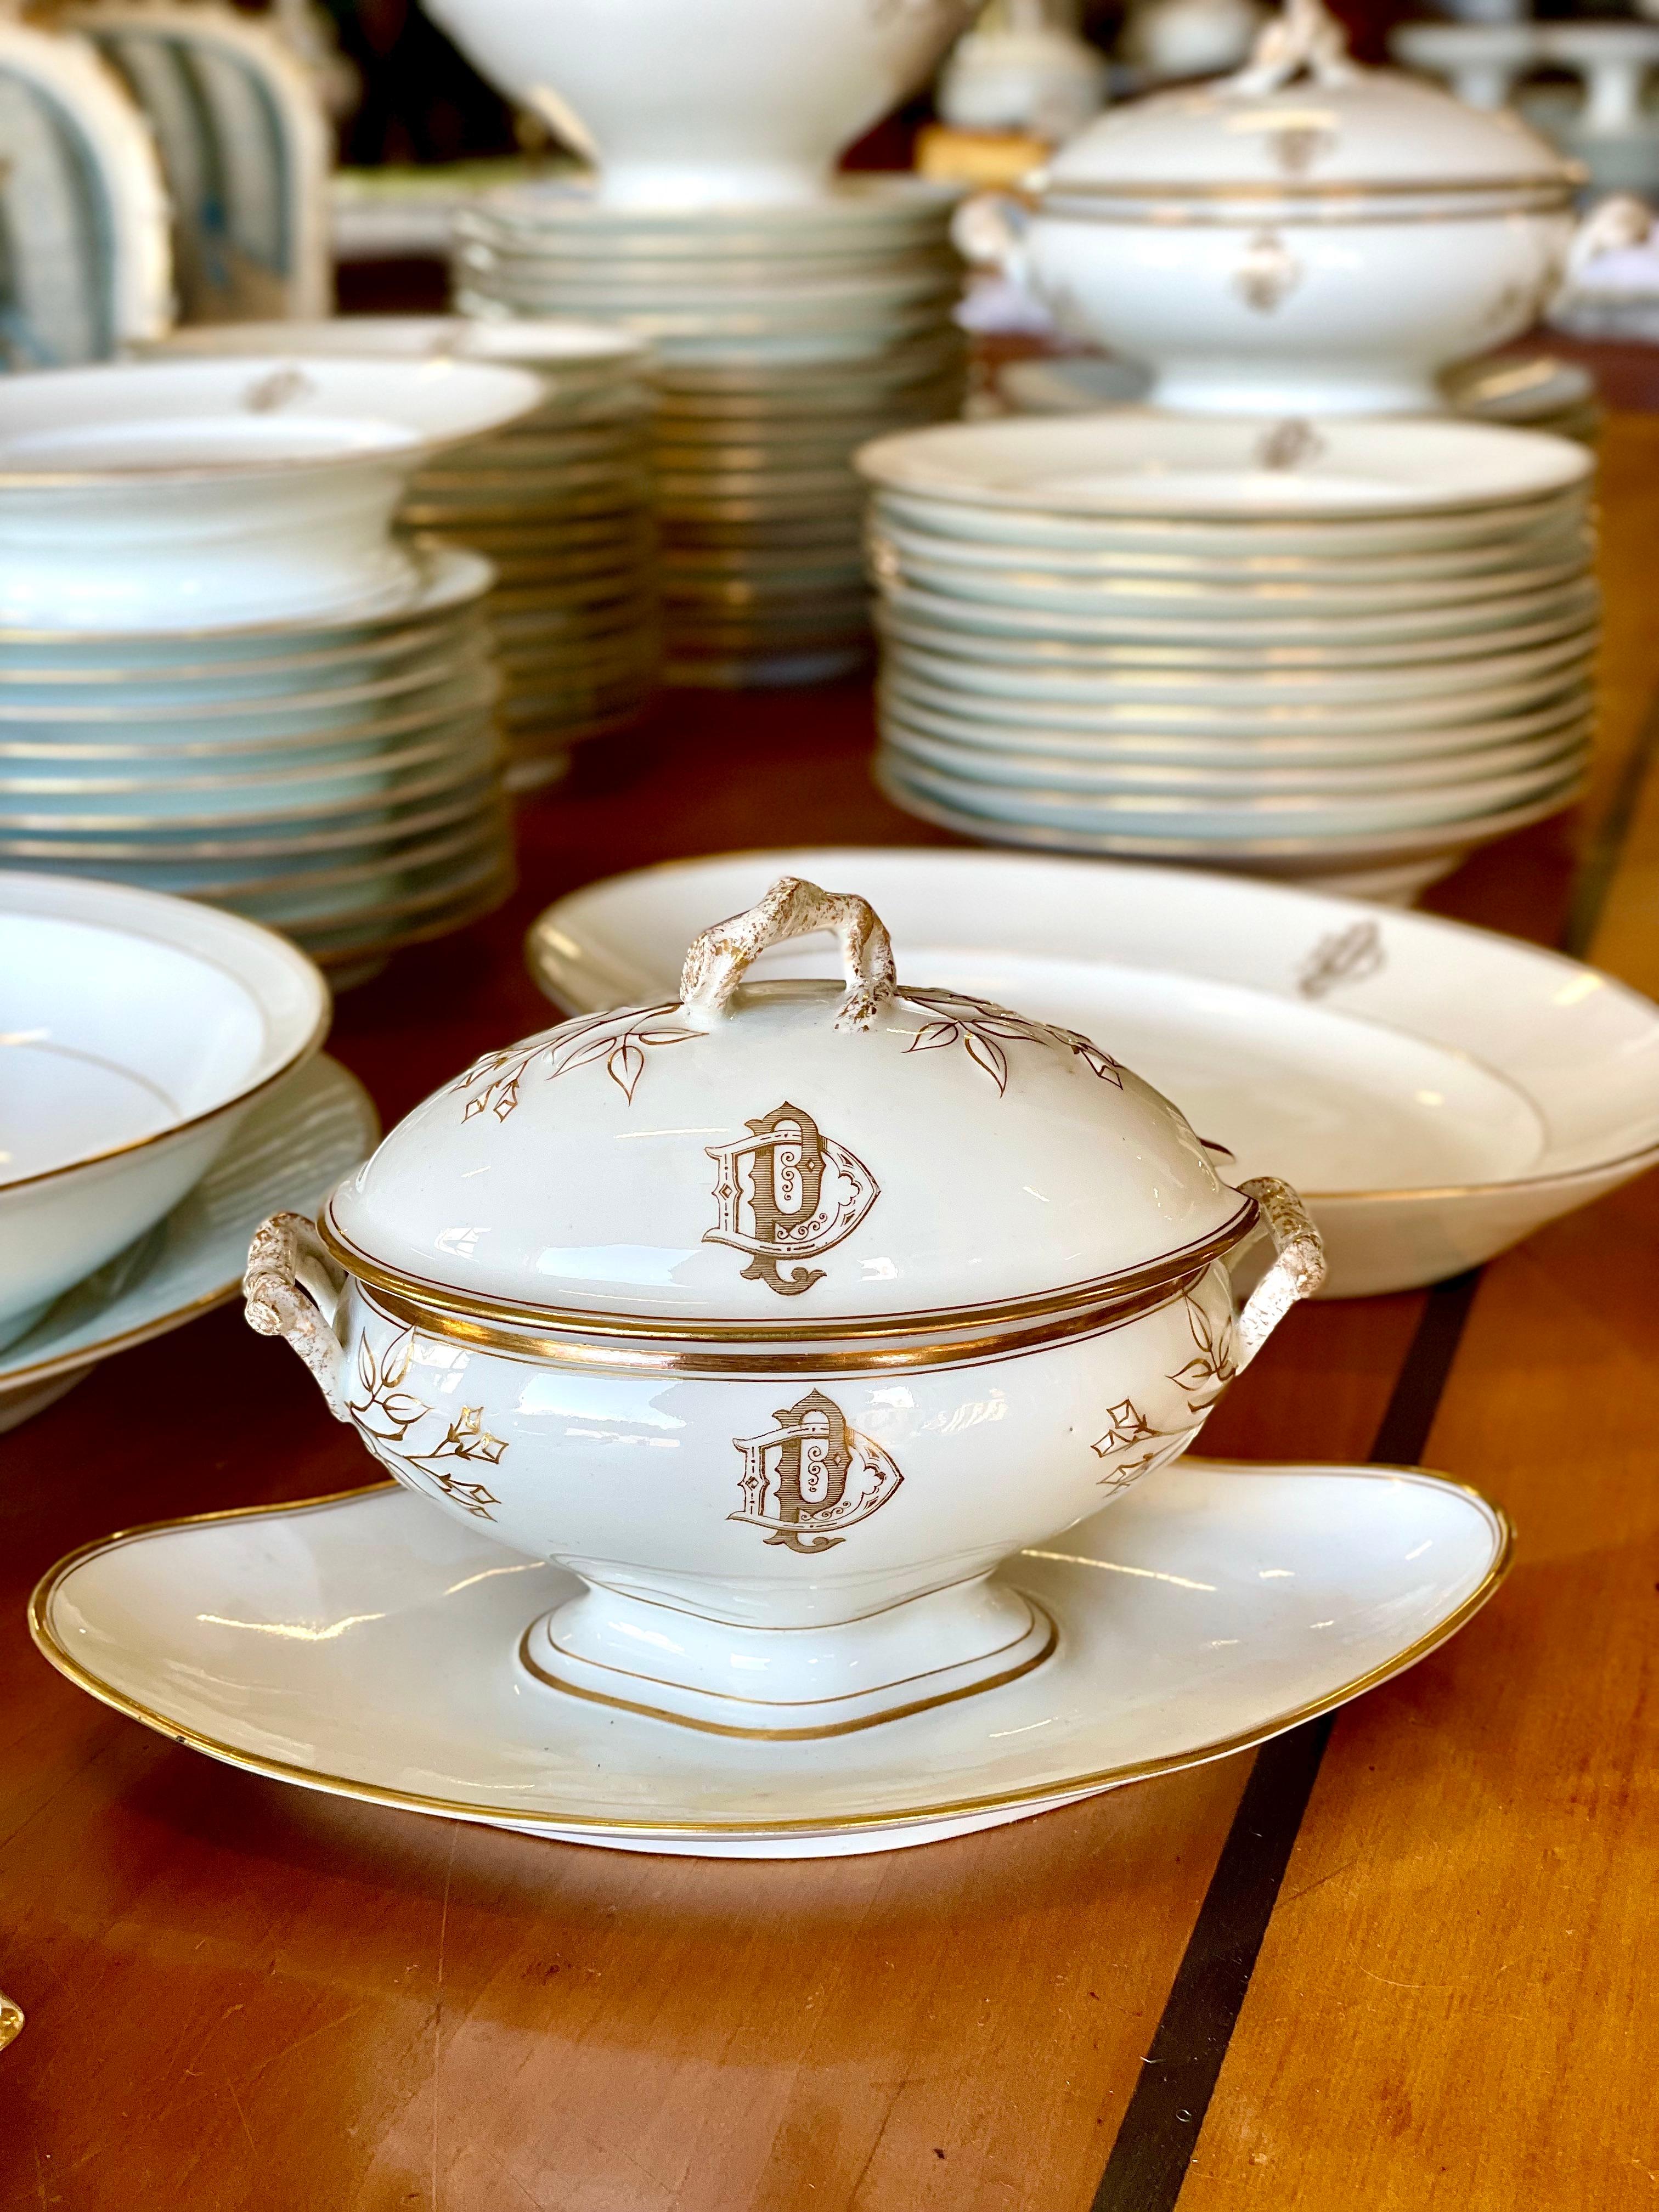 Limoges Porcelain Set of 50 Piece Dinner Service with Gilt Edges and Monogramme For Sale 1